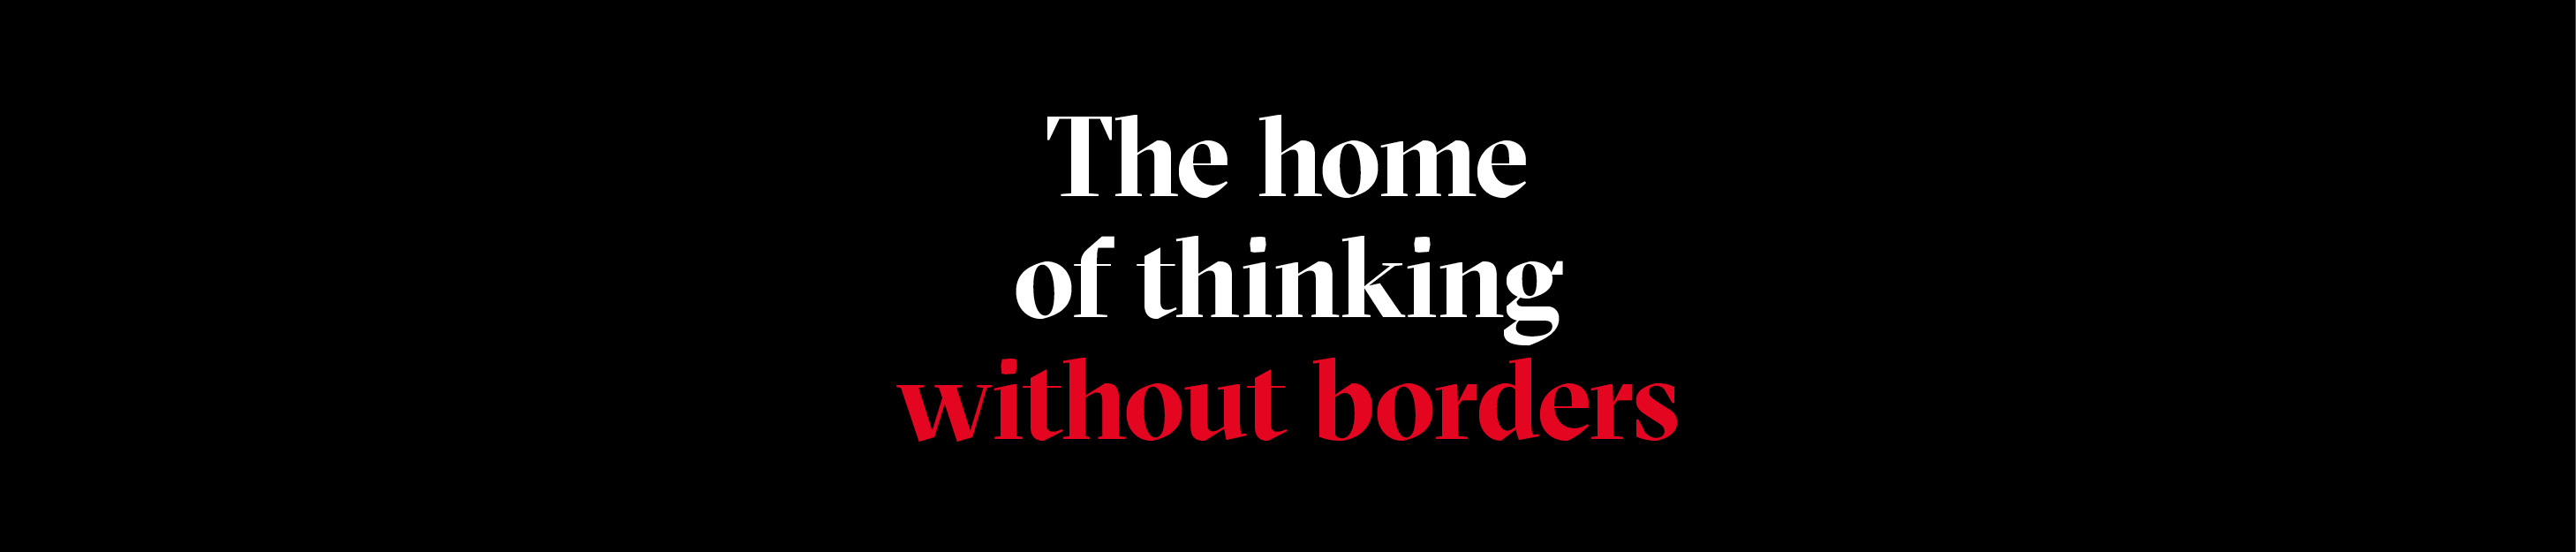 The home of thinking without borders